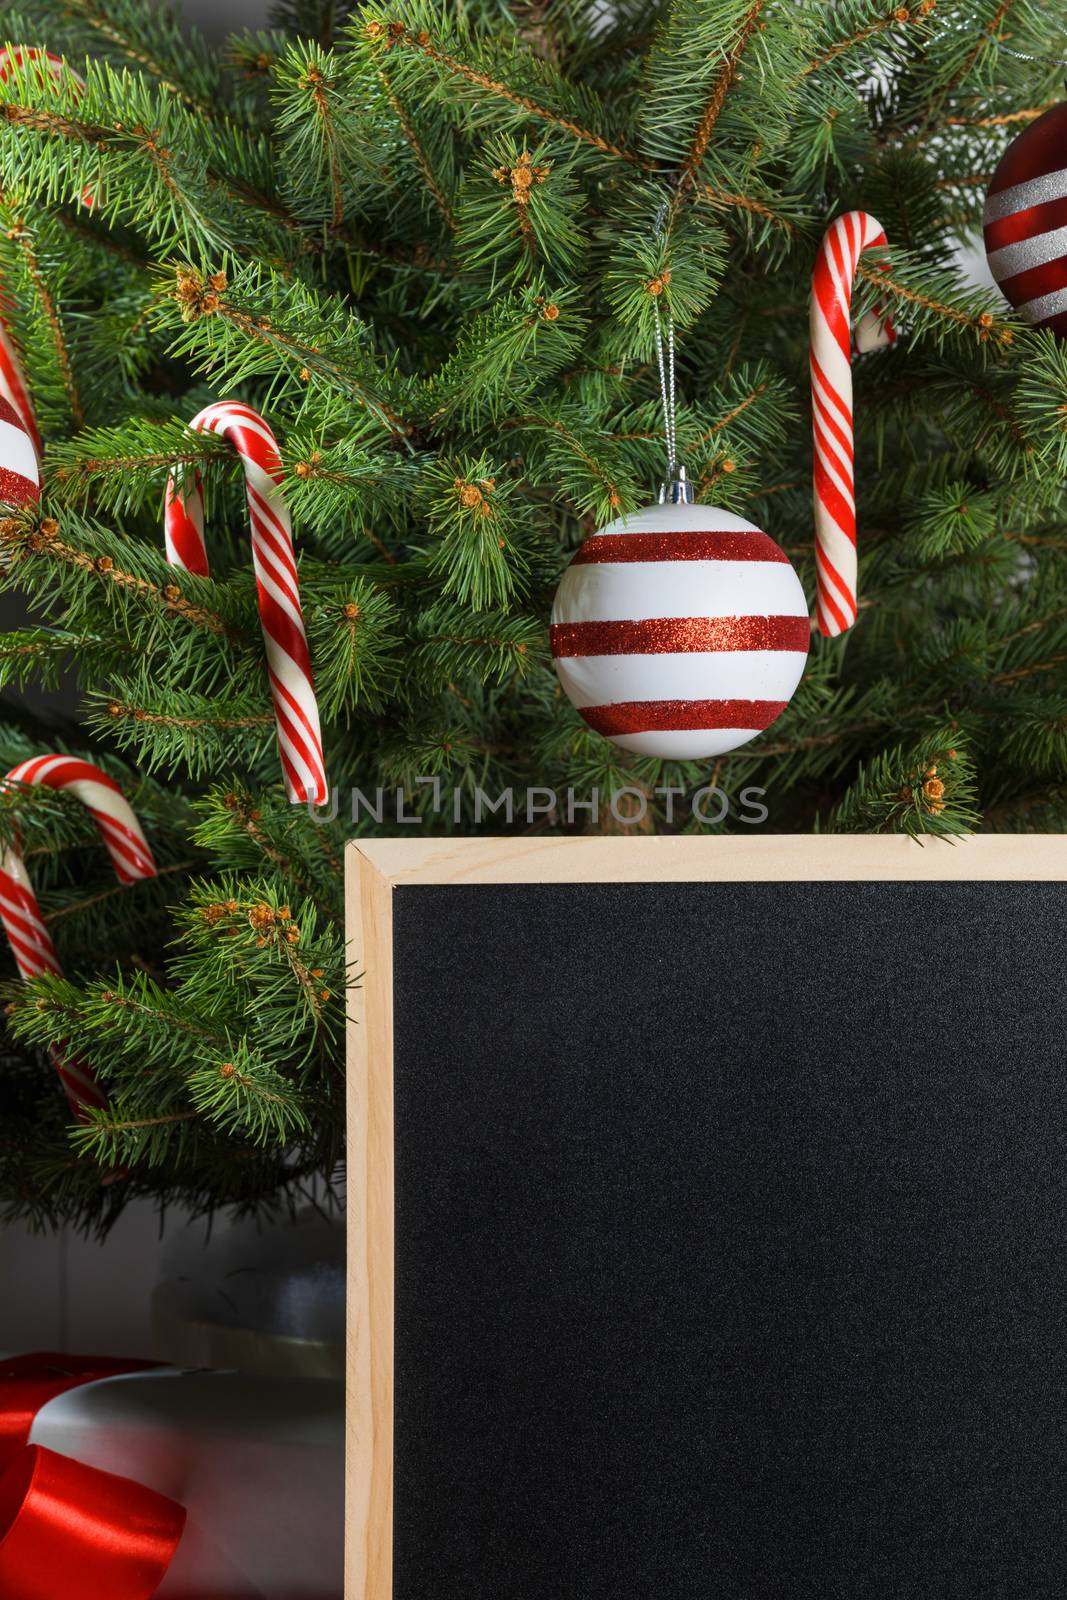 Rustic chalkboard and christmas tree decorated with candy canes and baubles